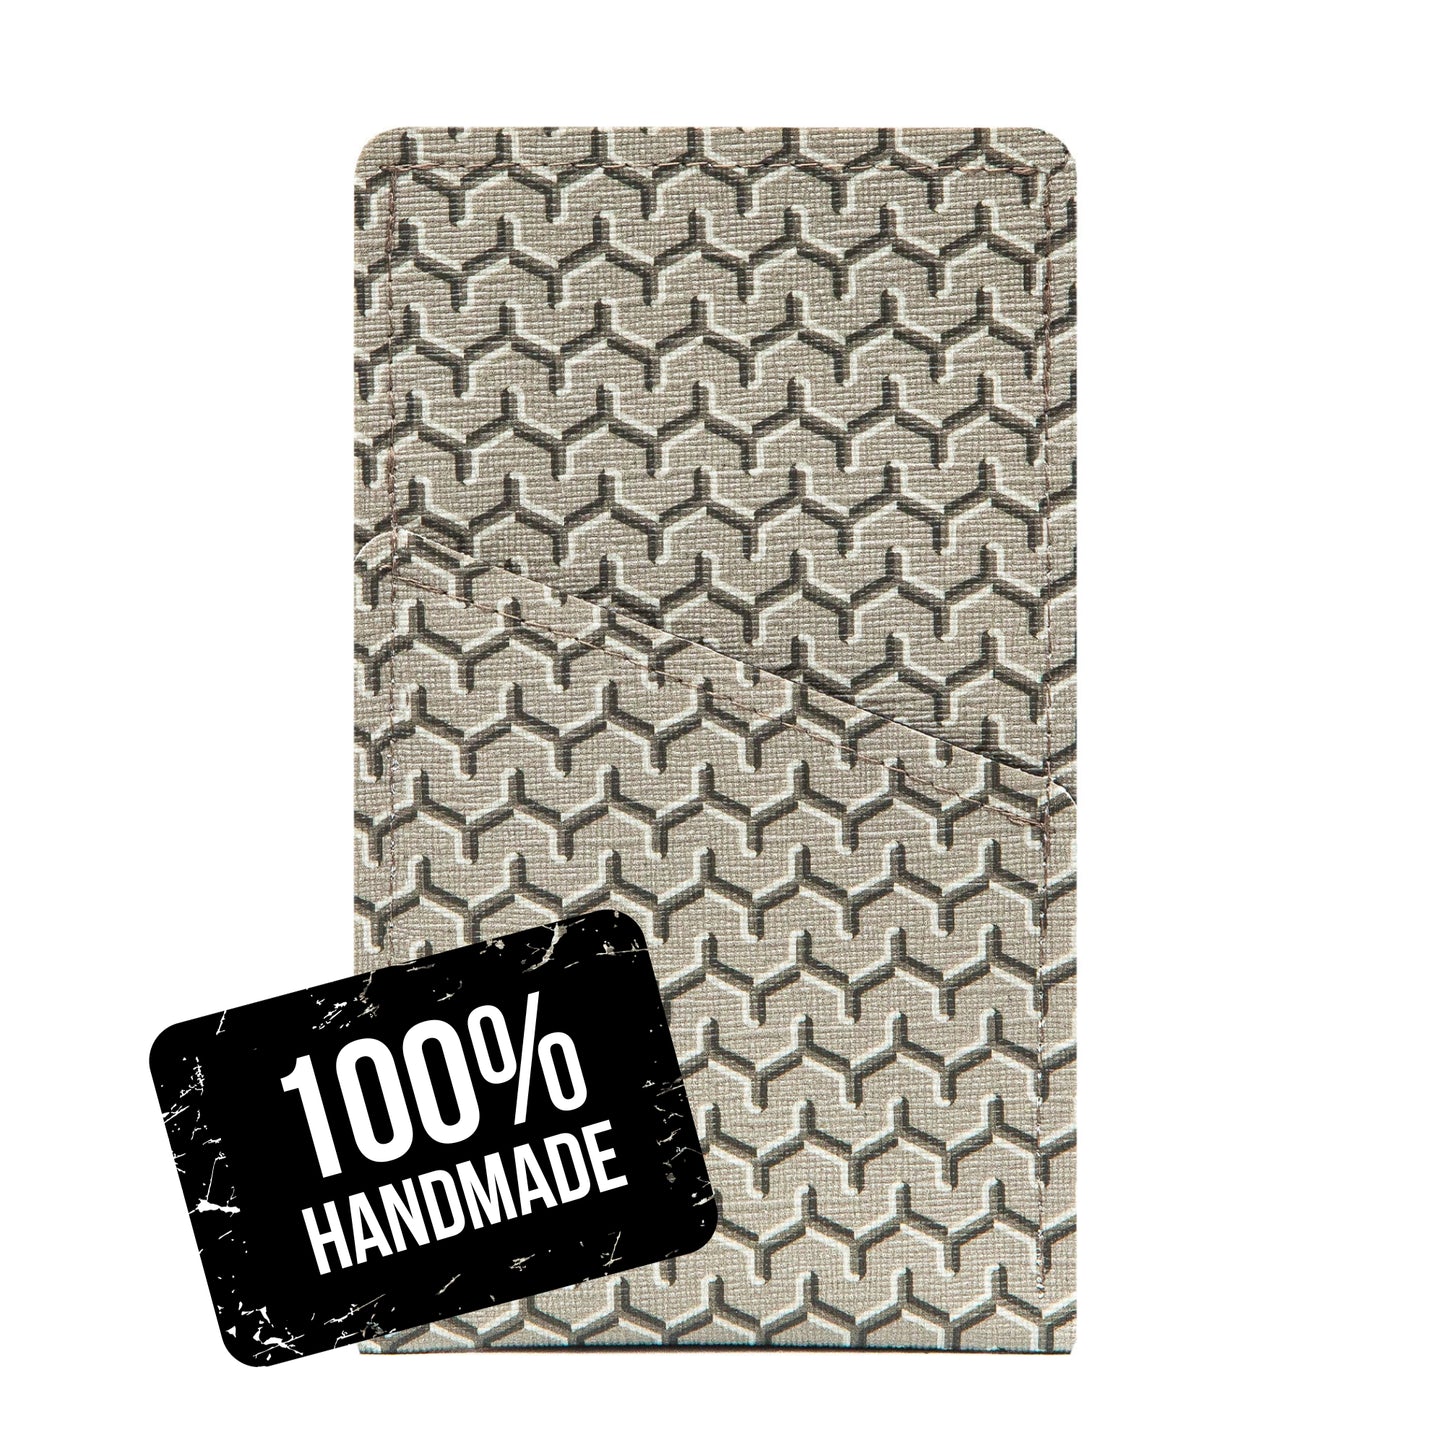 Modern Faux Leather iPhone Sleeve with Abstract Grey Geometric Design and Card Pocket